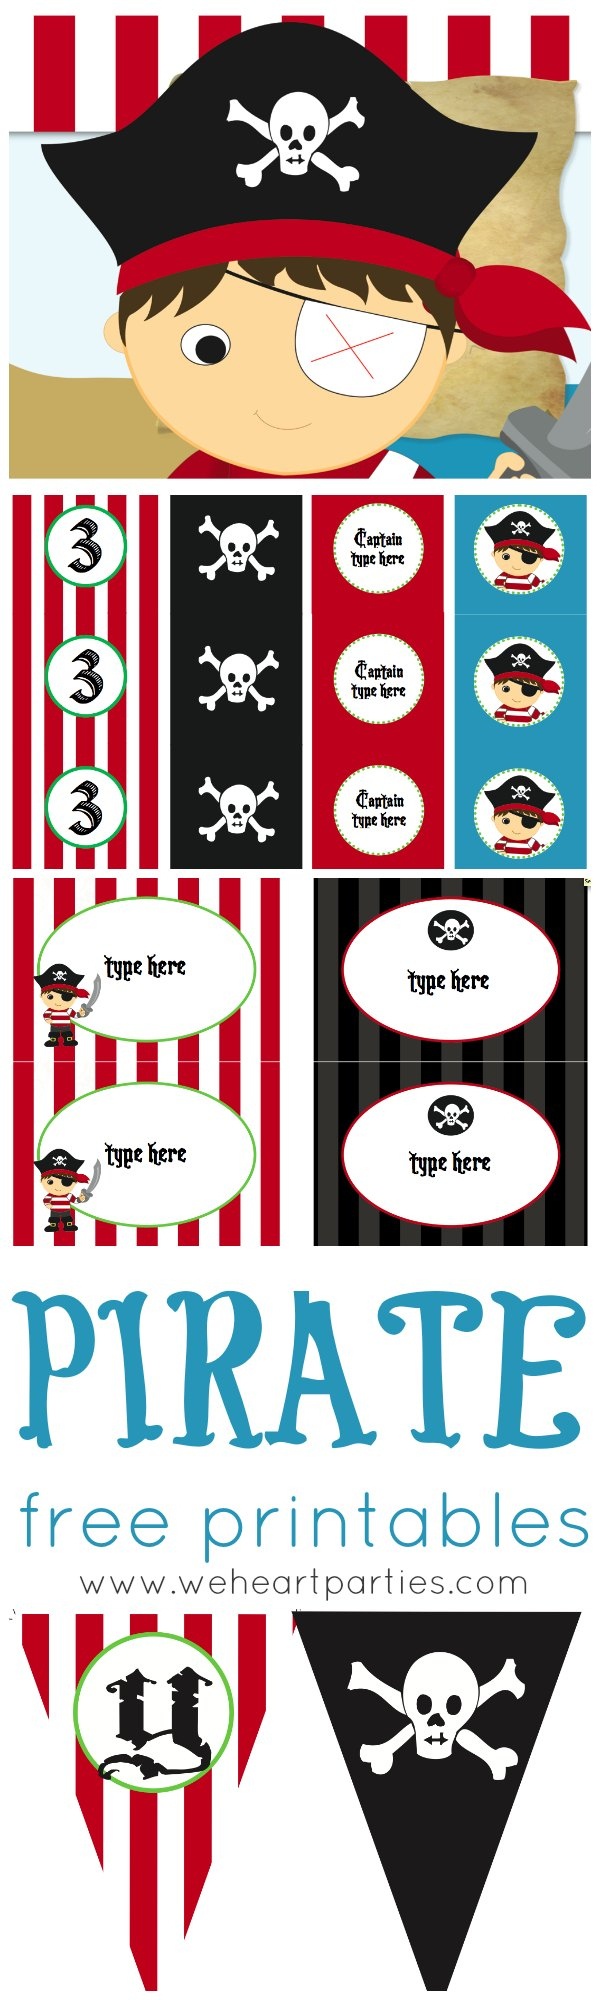 We Heart Parties: Free Printables Pirate Party Free Printables - Free Printable Pirate Cupcake Toppers